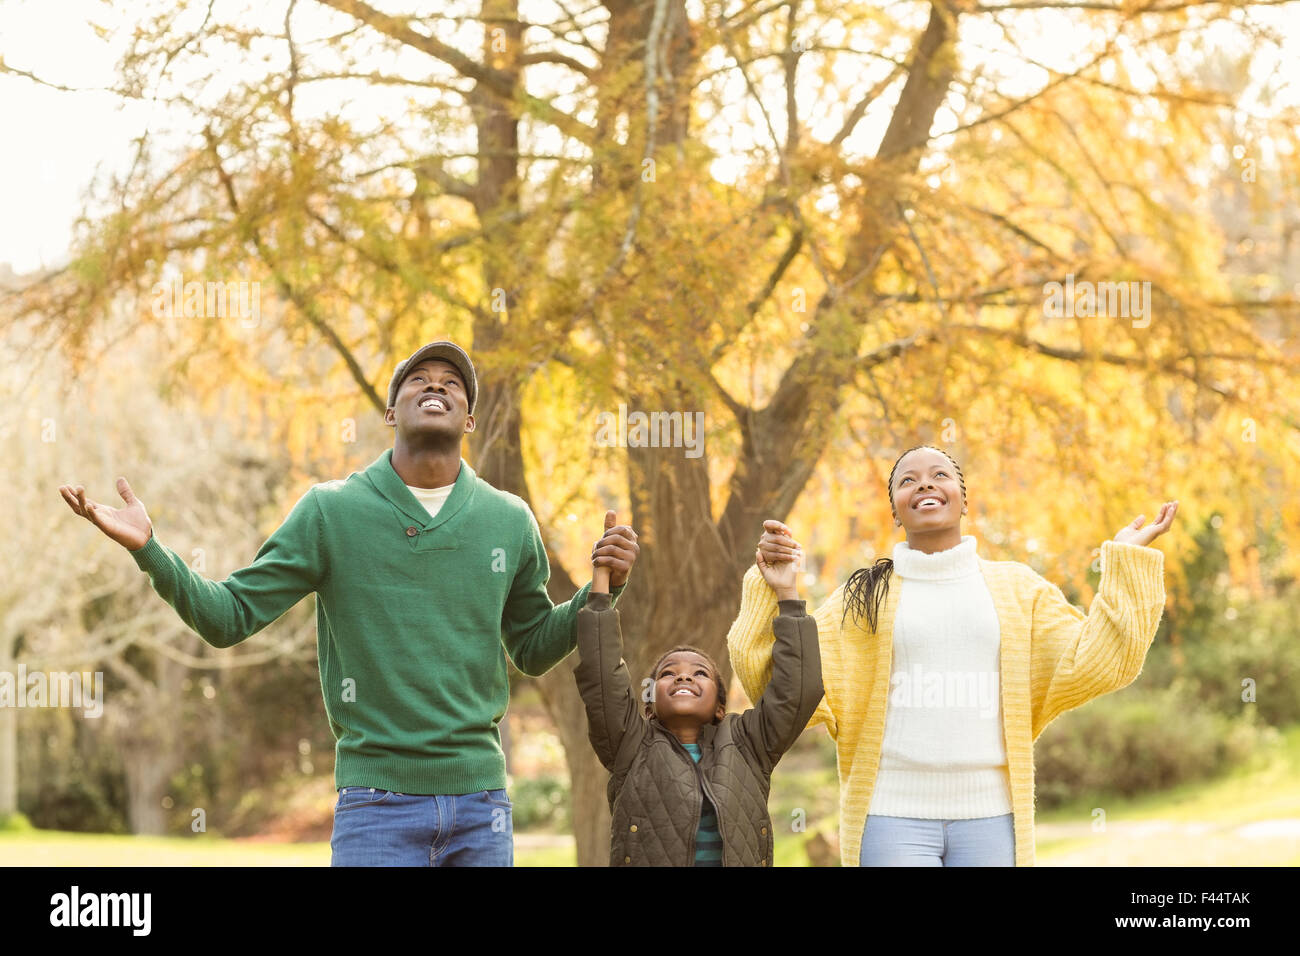 Portrait of a young family with arms raised Stock Photo